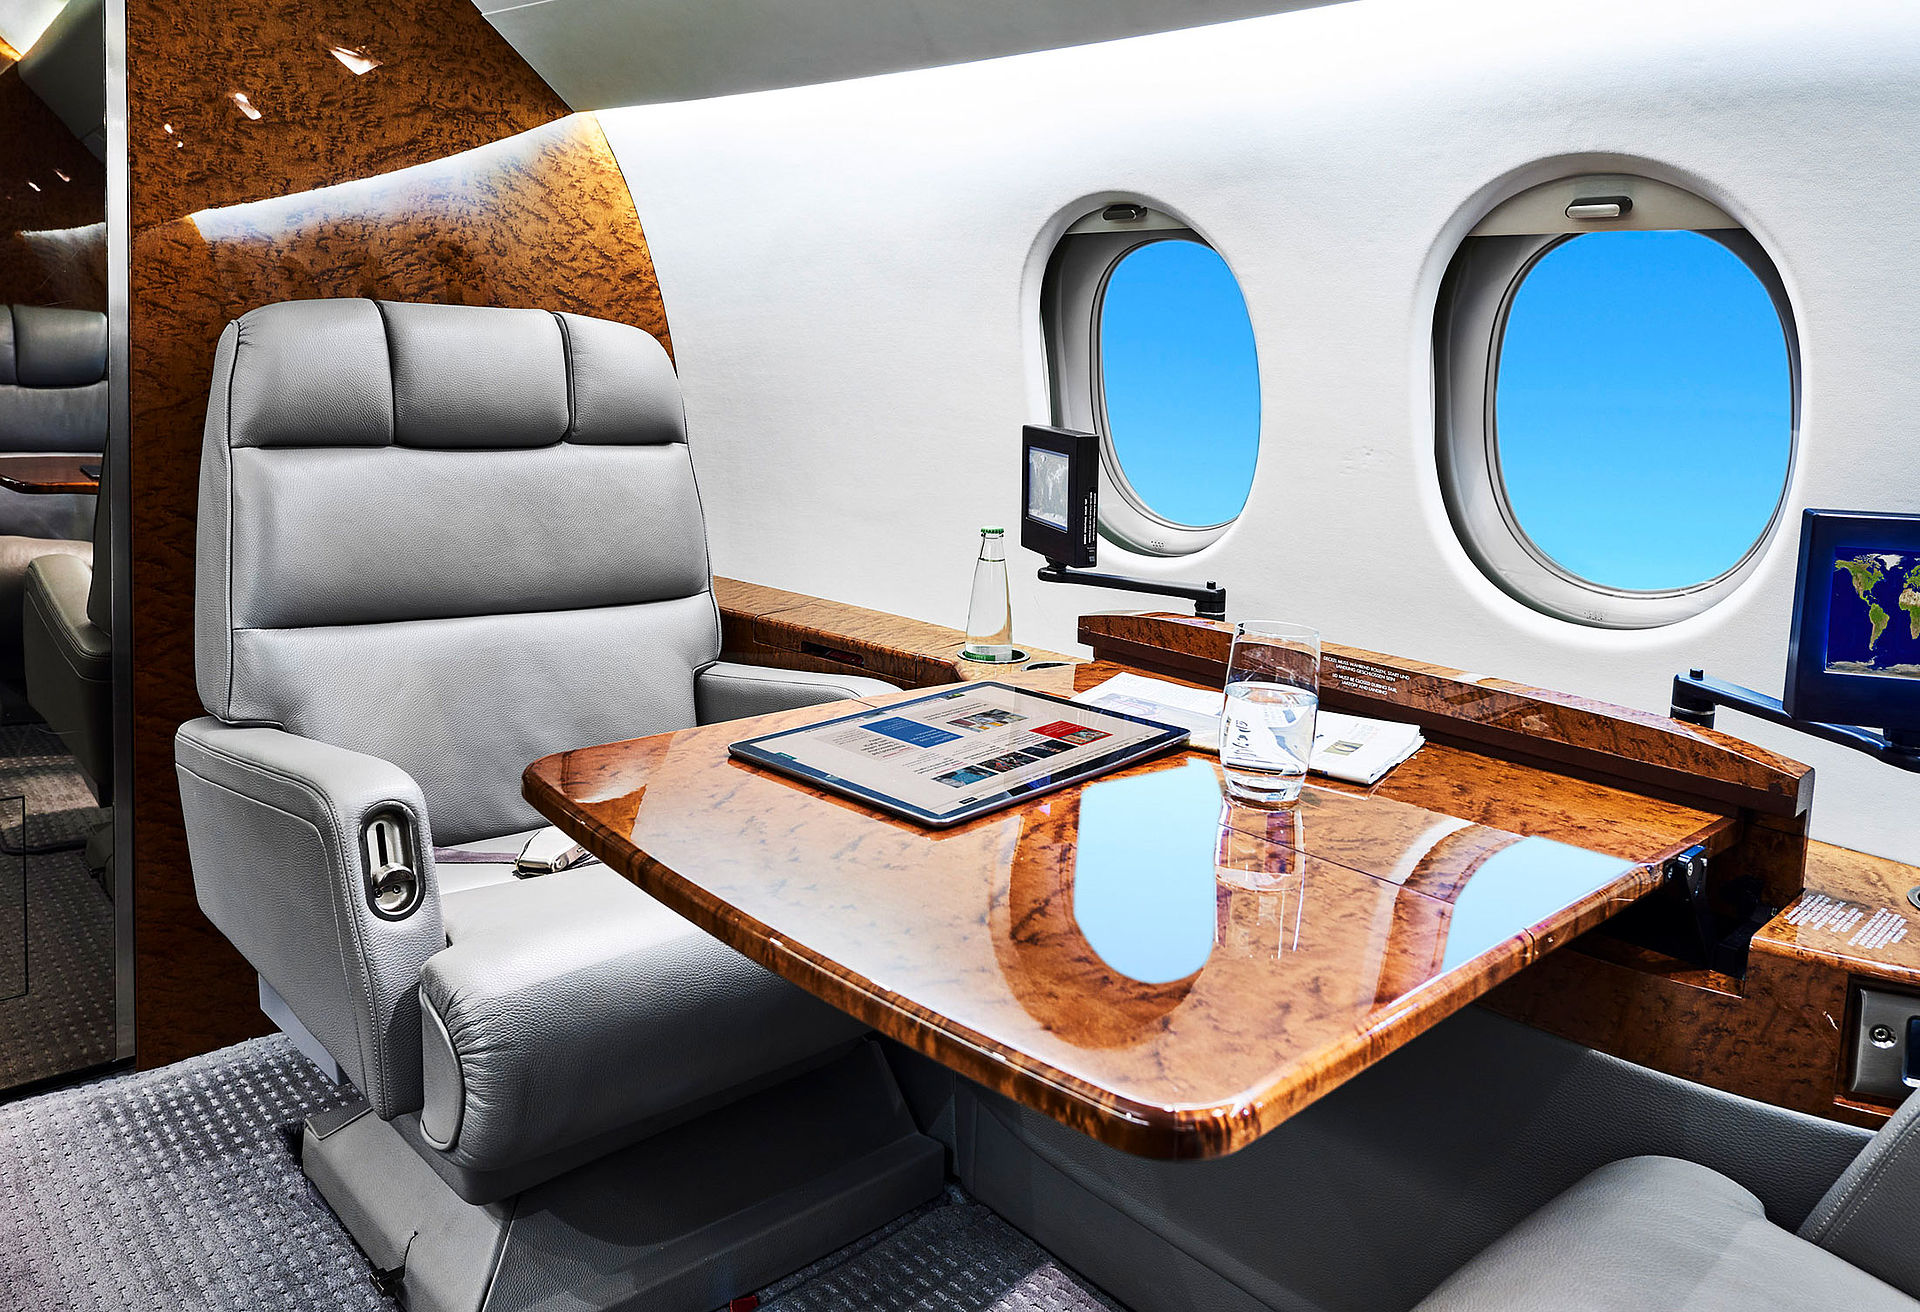 Executive seating with pull-out table and plug-in LCD monitors in aft cabin partition | Aero-Dienst Aircraft Sales